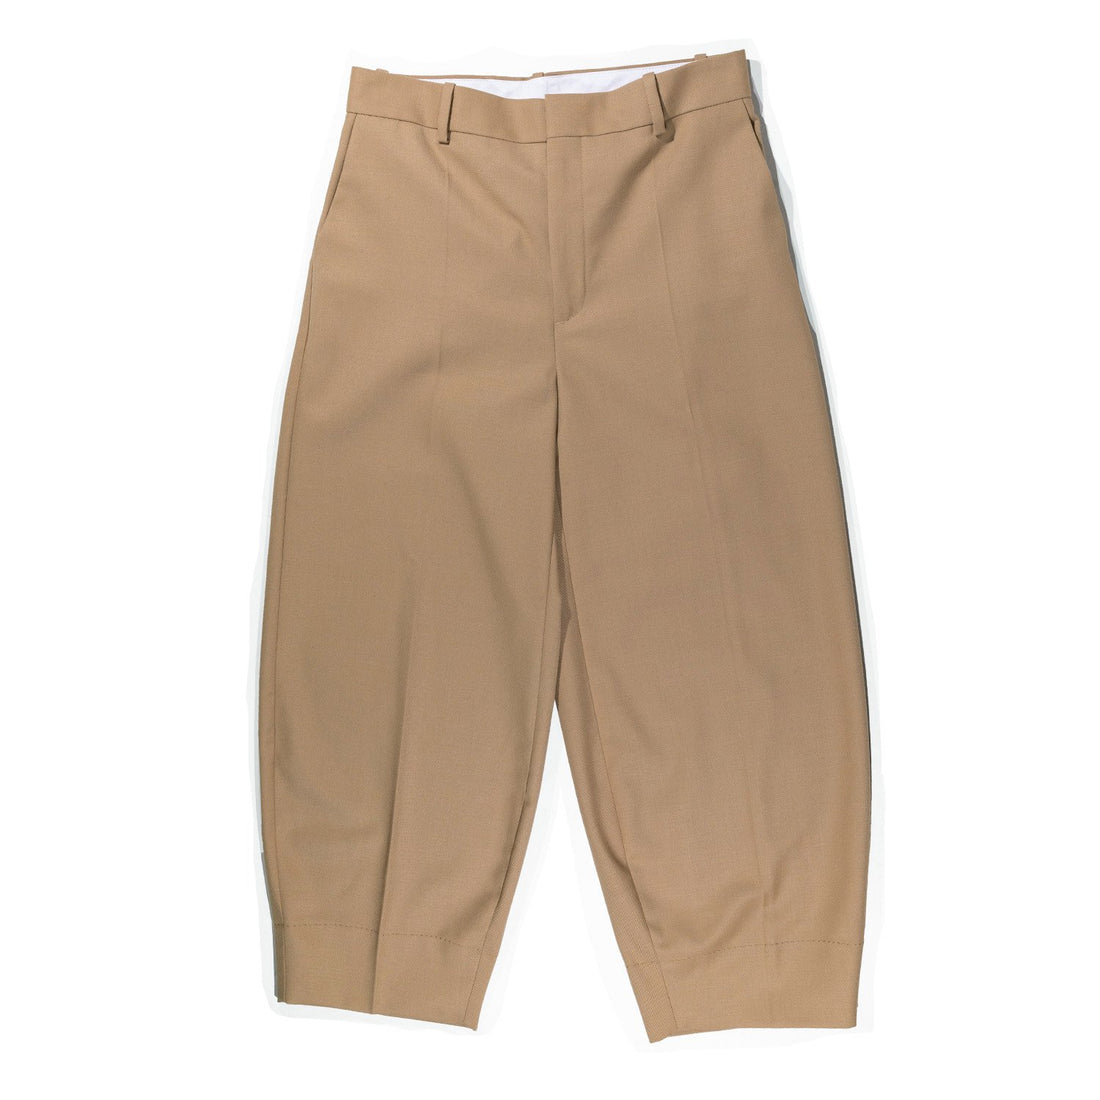 Rodebjer Aia Pant in Camel